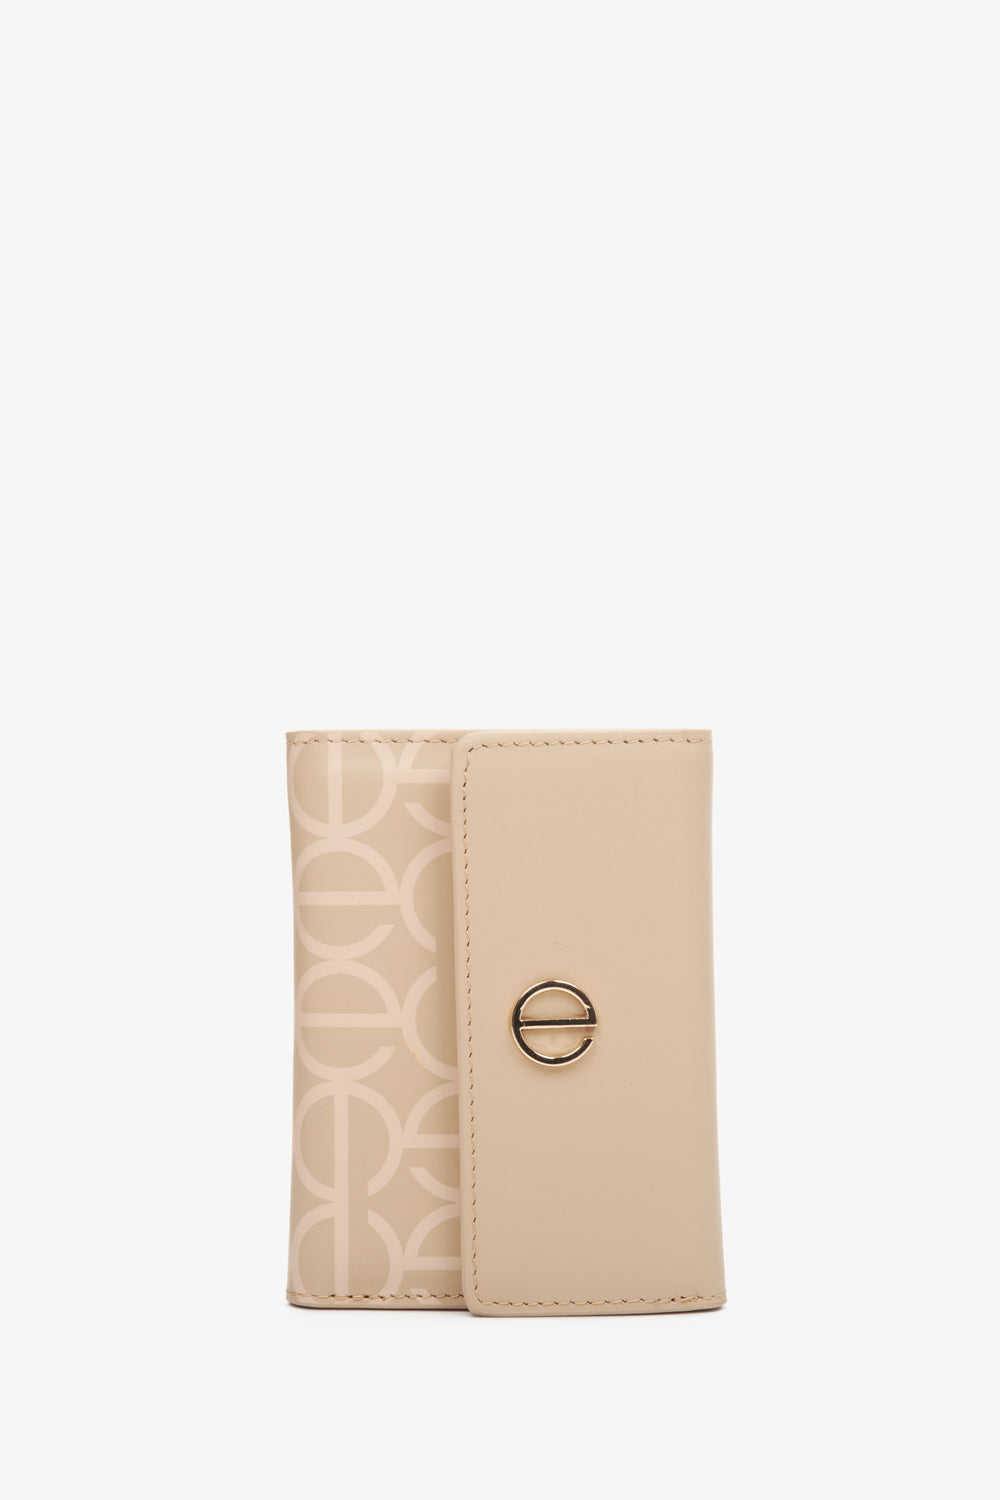 Medium Tri-Fold Women's Beige Wallet made of Genuine Leather with Golden Accents Estro ER00113651.